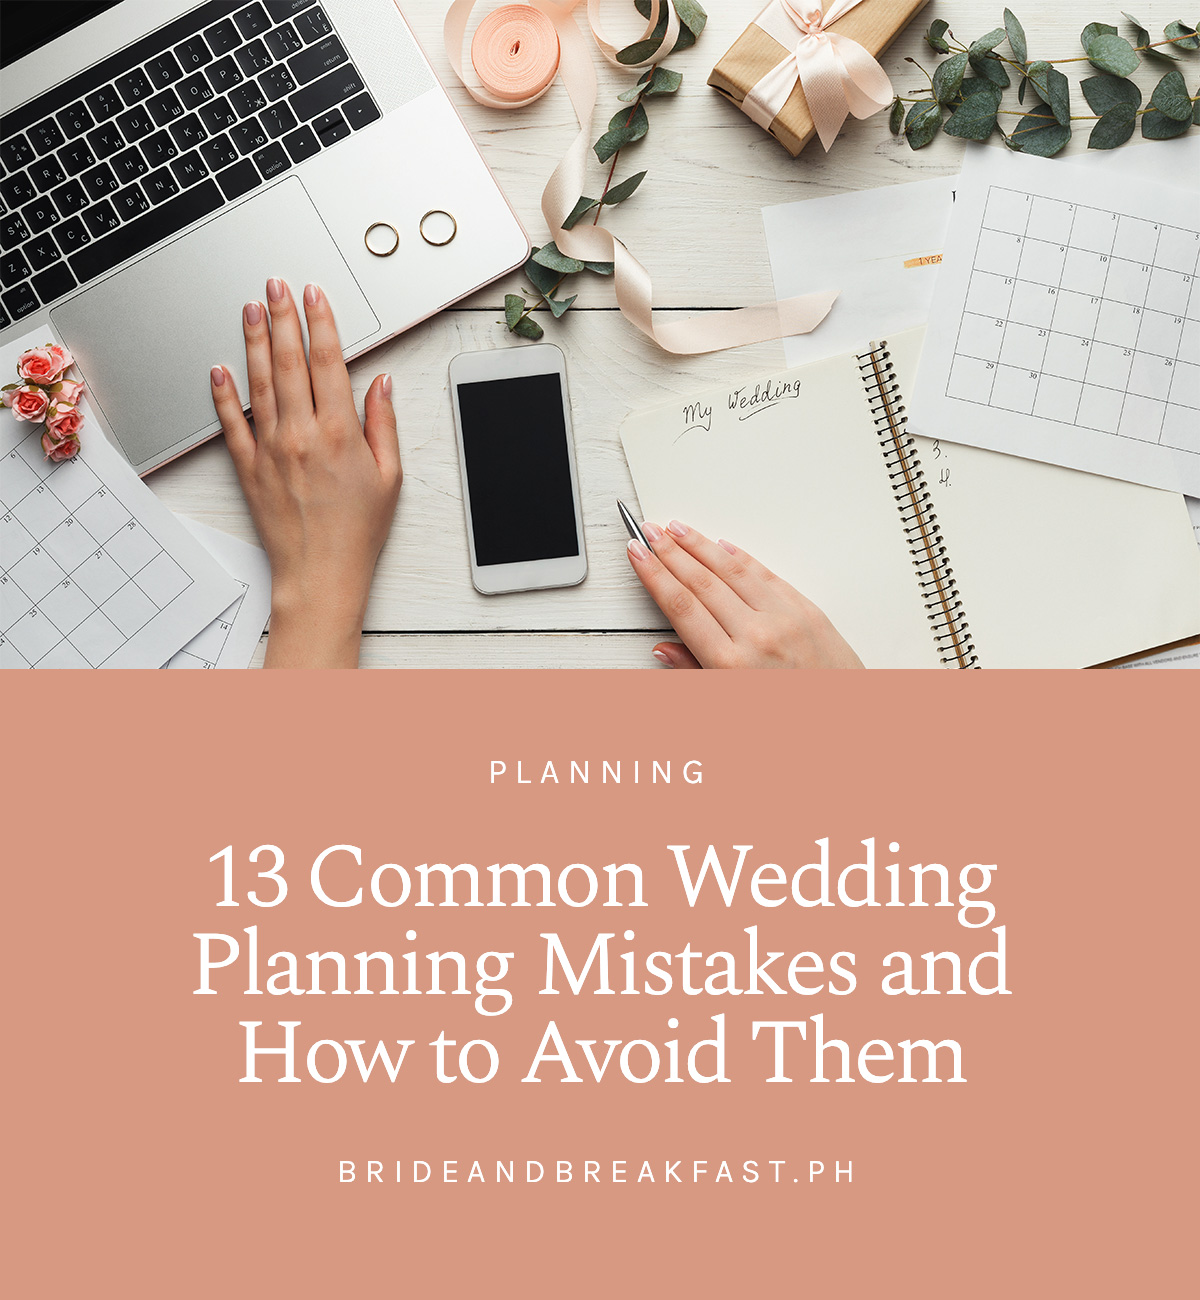 13 Common Wedding Planning Mistakes and How to Avoid Them